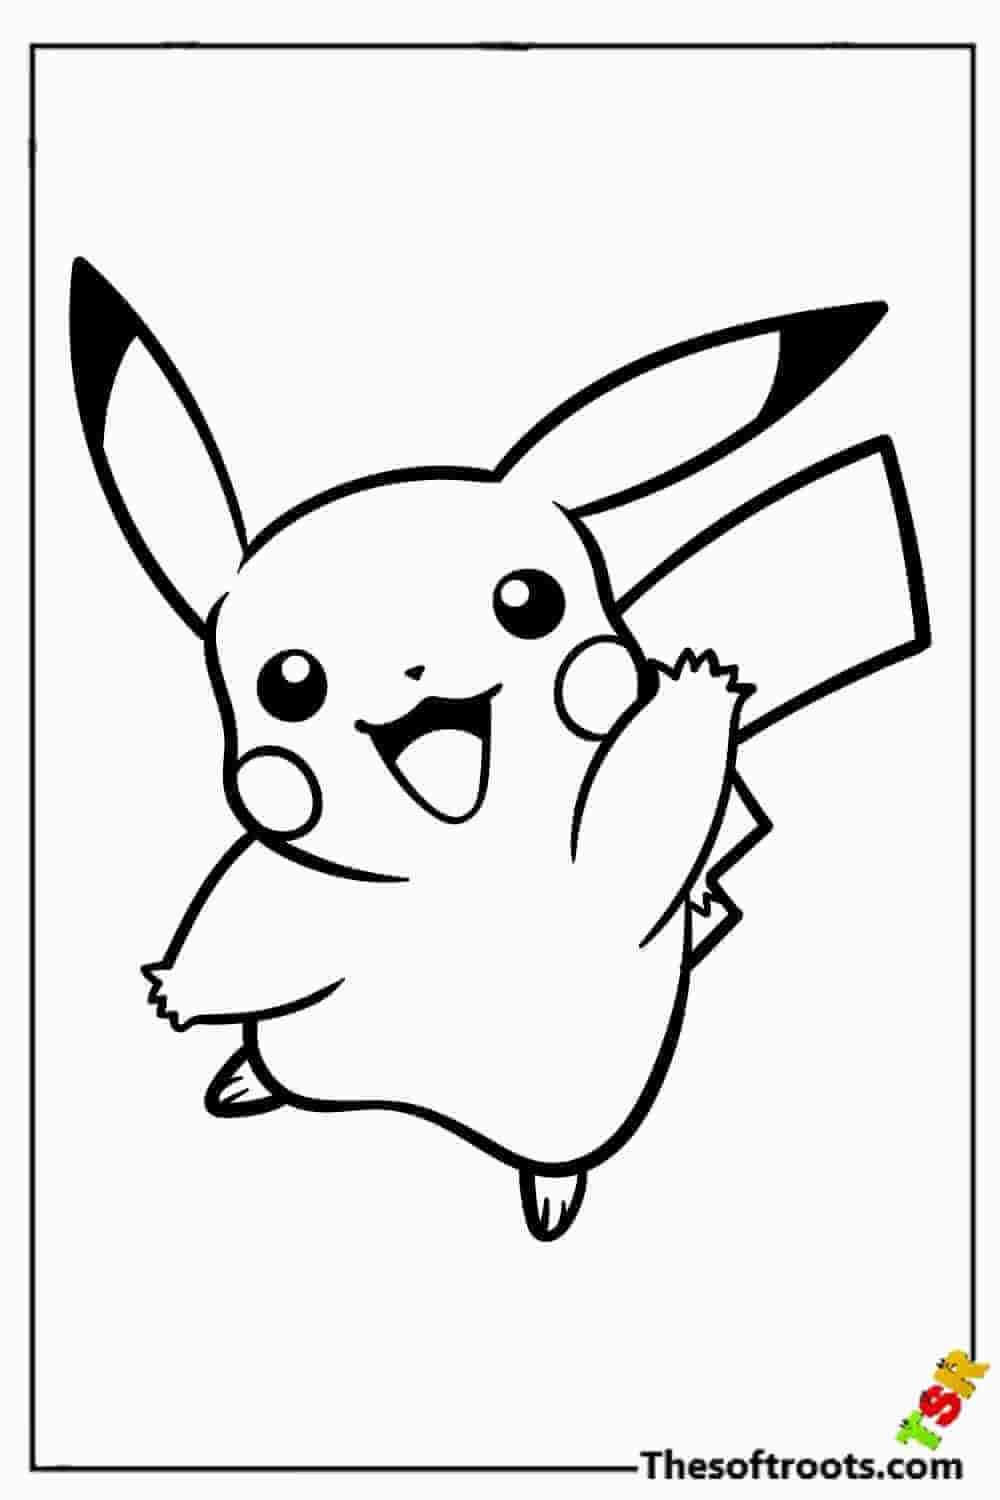 Pikachu to print coloring pages